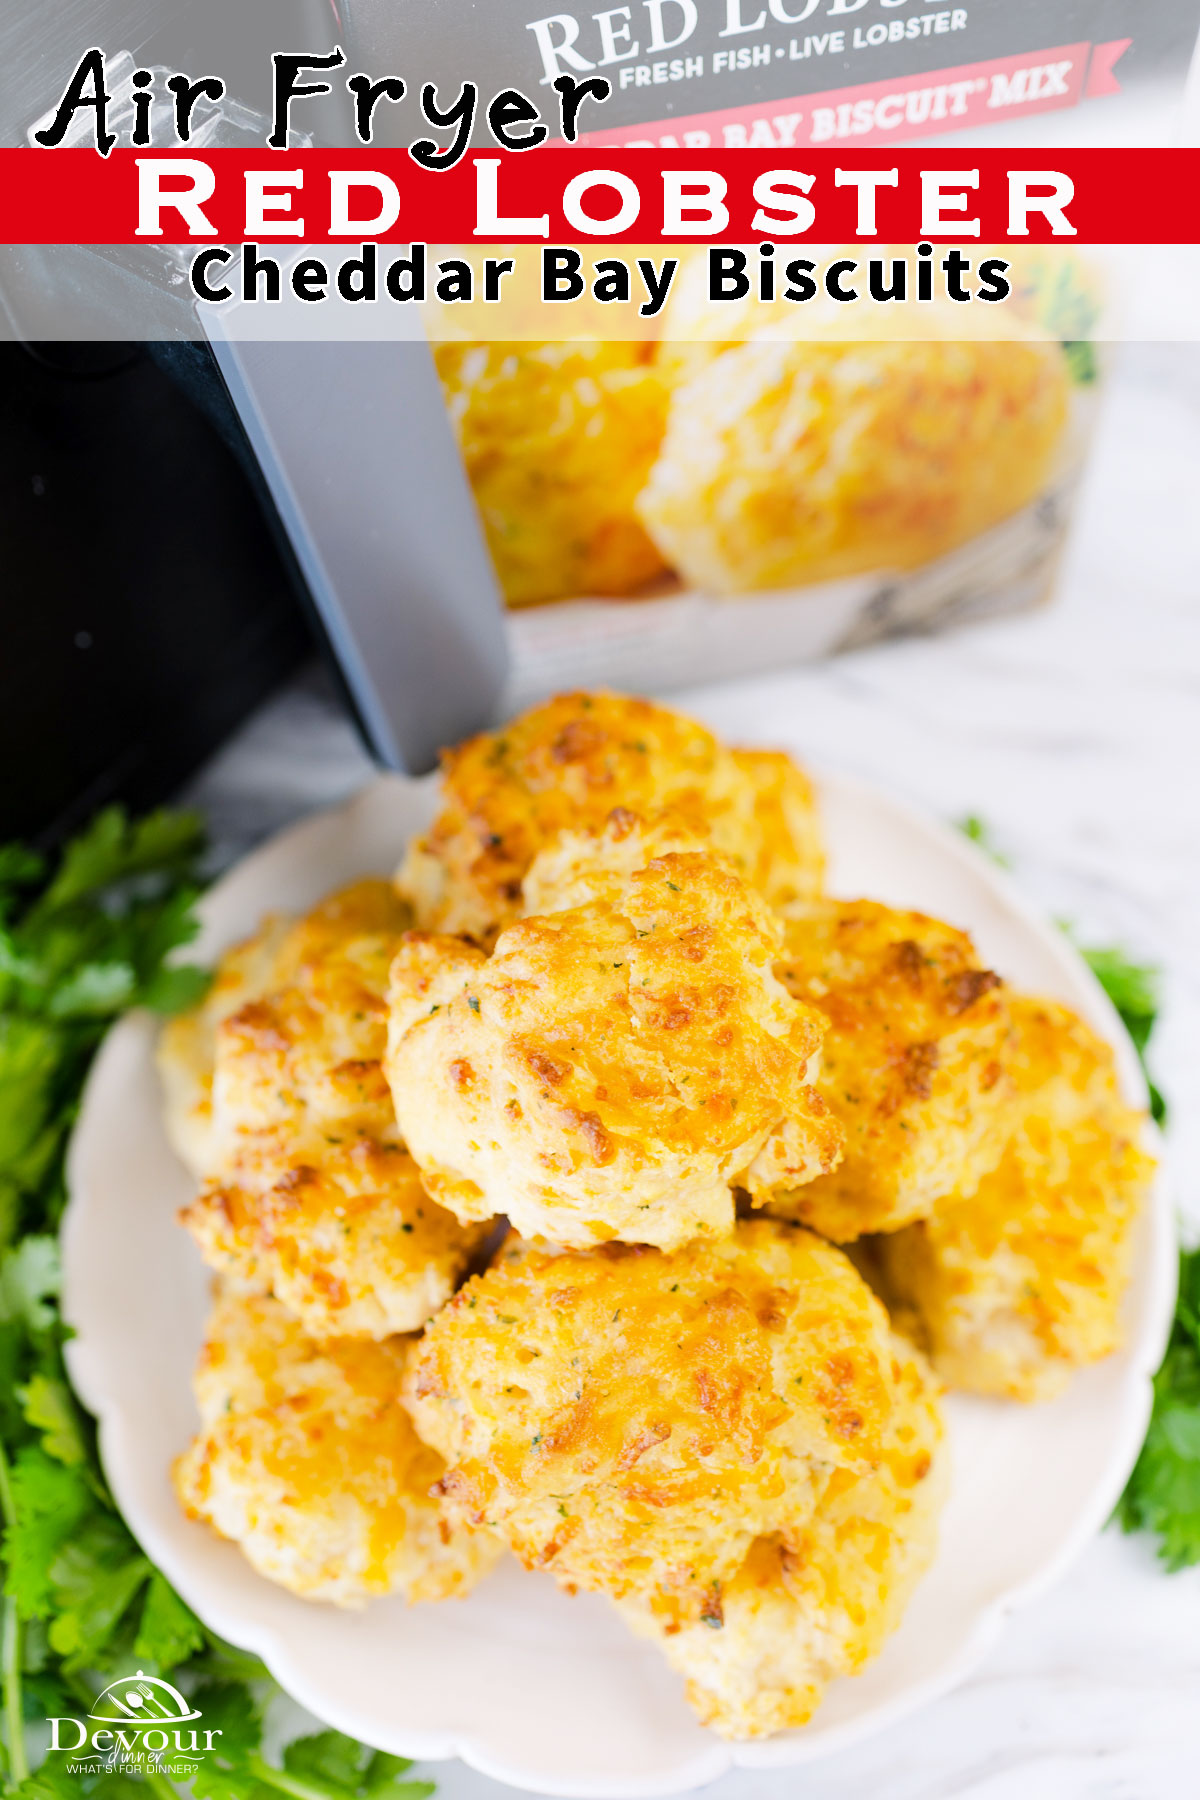 Have Cheddar Bay Red Lobster Biscuits in Air Fryer any time you like with this super easy recipe! Using a Red Lobster boxed biscuit mix and some extras, you can get perfectly crisp-on-the-outside biscuits in minutes!